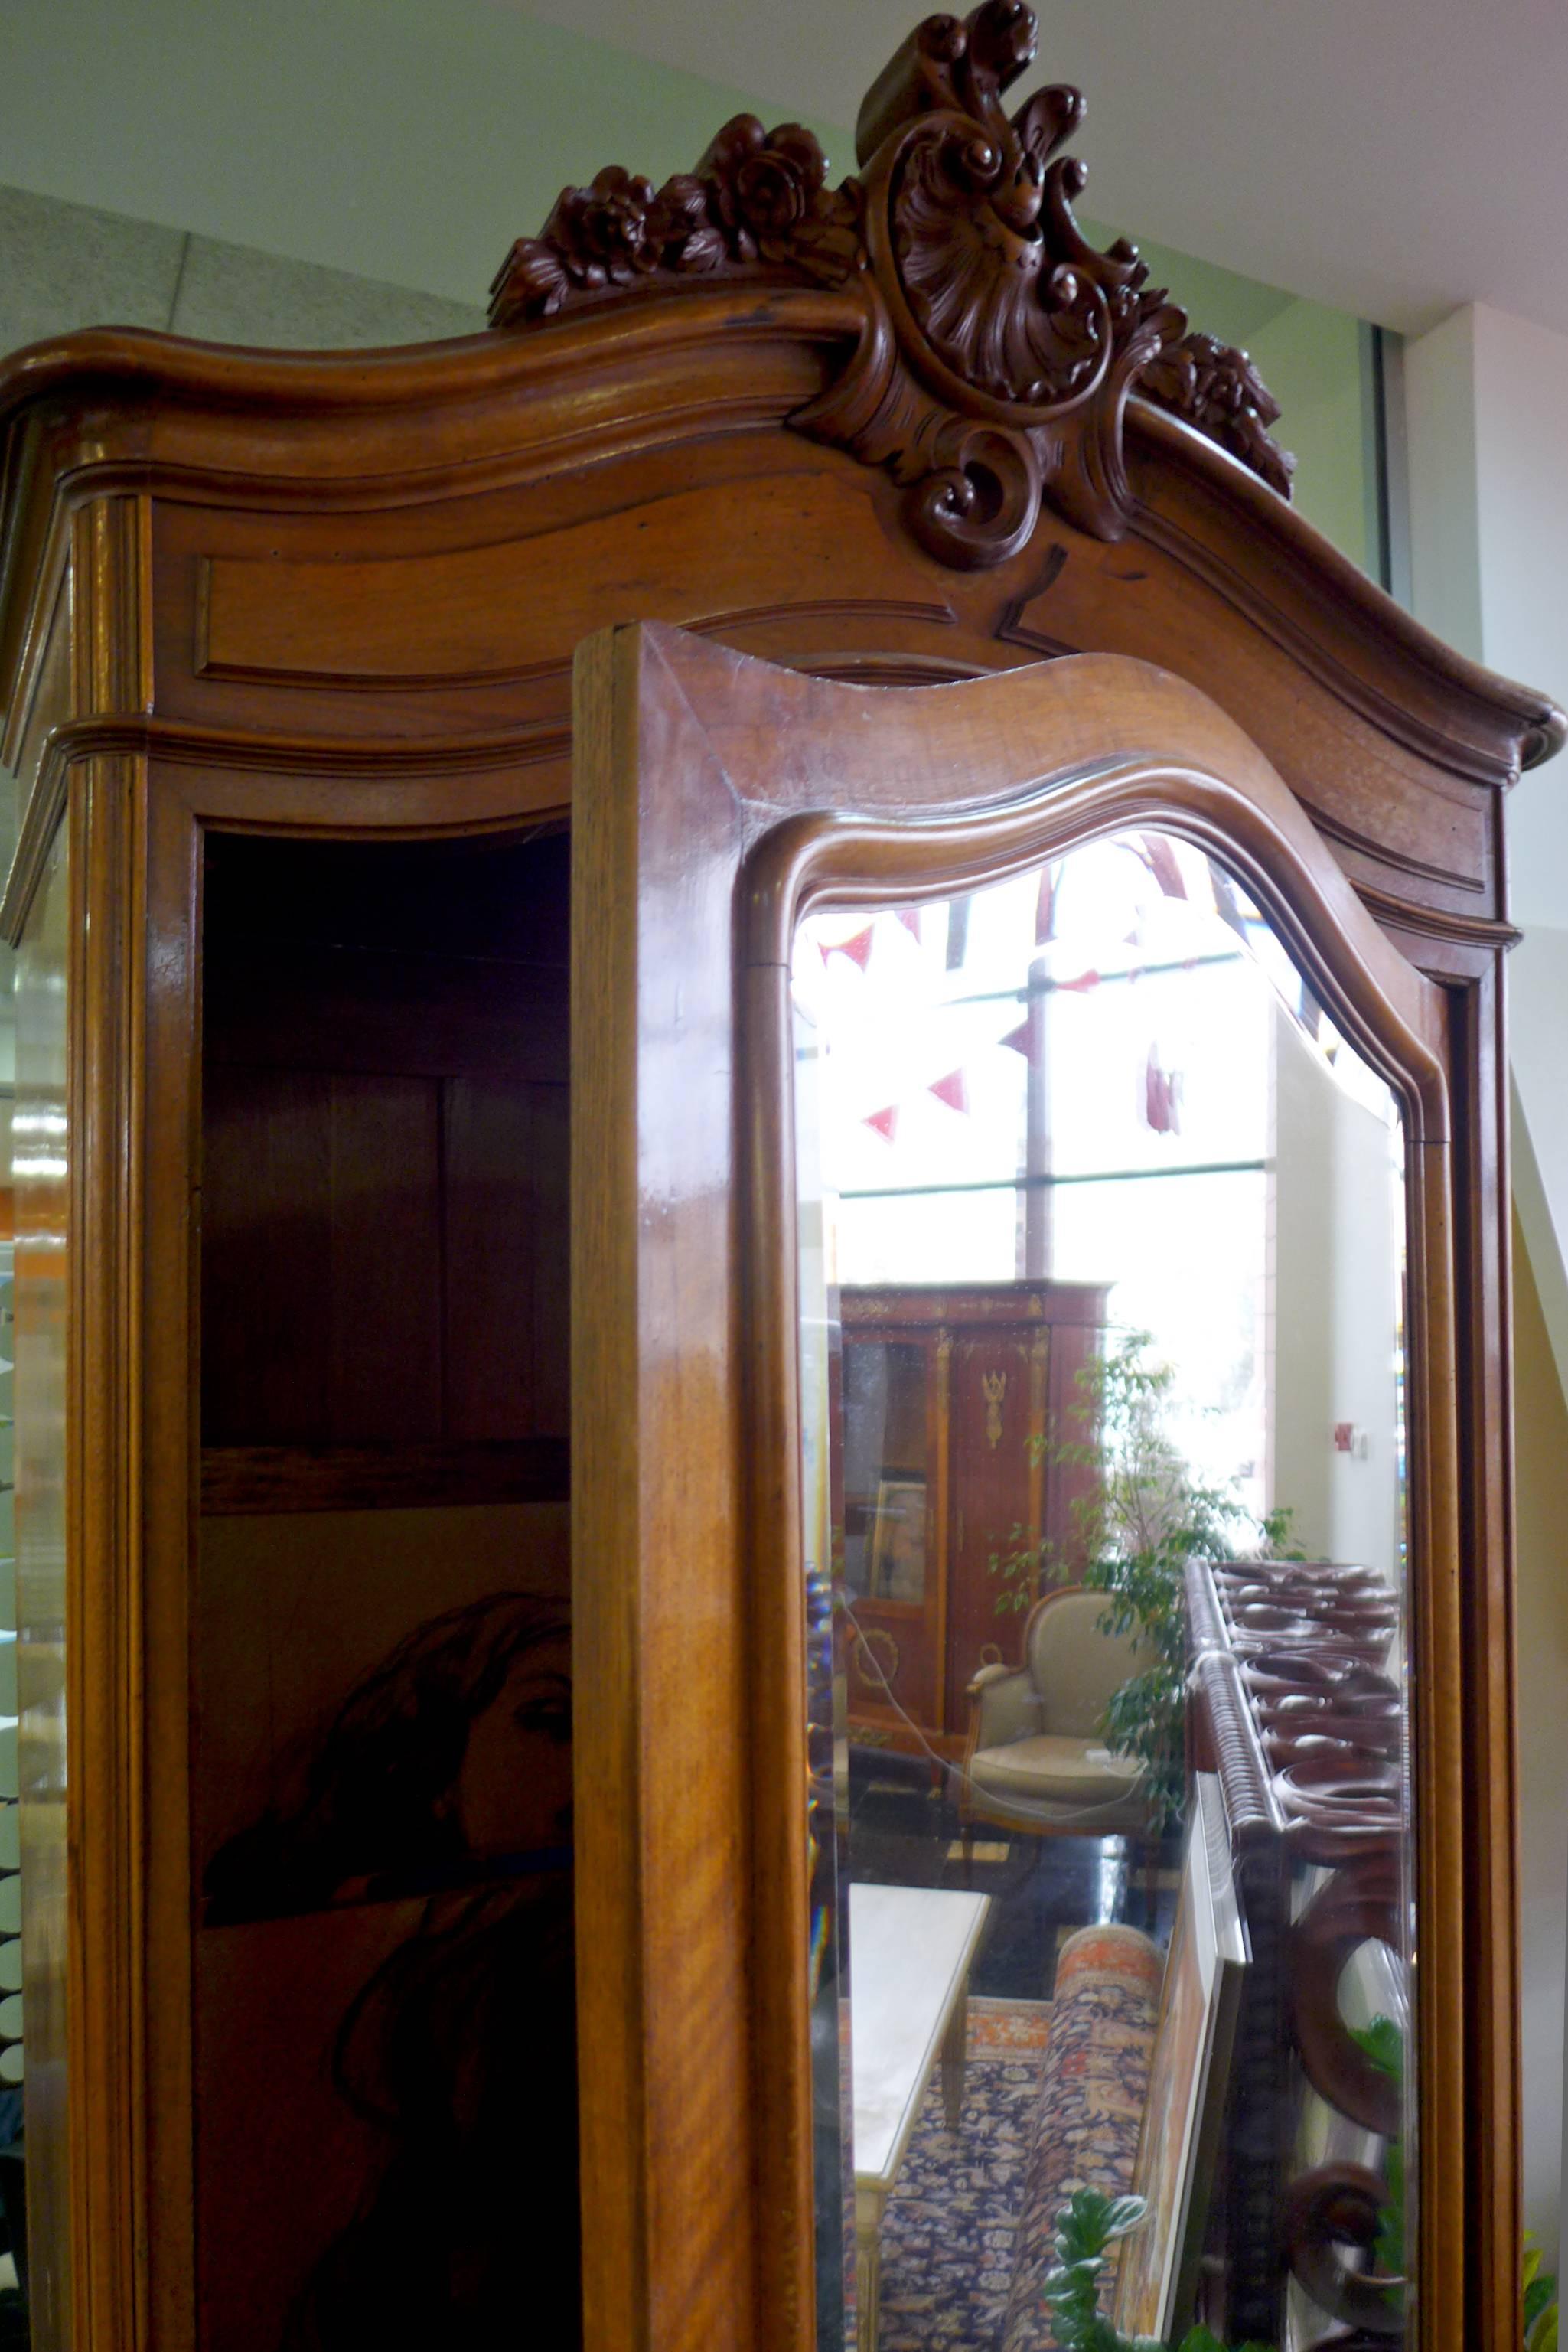 19th century French walnut cabinet/wardrobe with crystal mirror at the front door. The top has hand-carved leaves and flowers. It has three shelves inside. The cabinet is standing on small carved cabriole legs,
France, circa 1870.